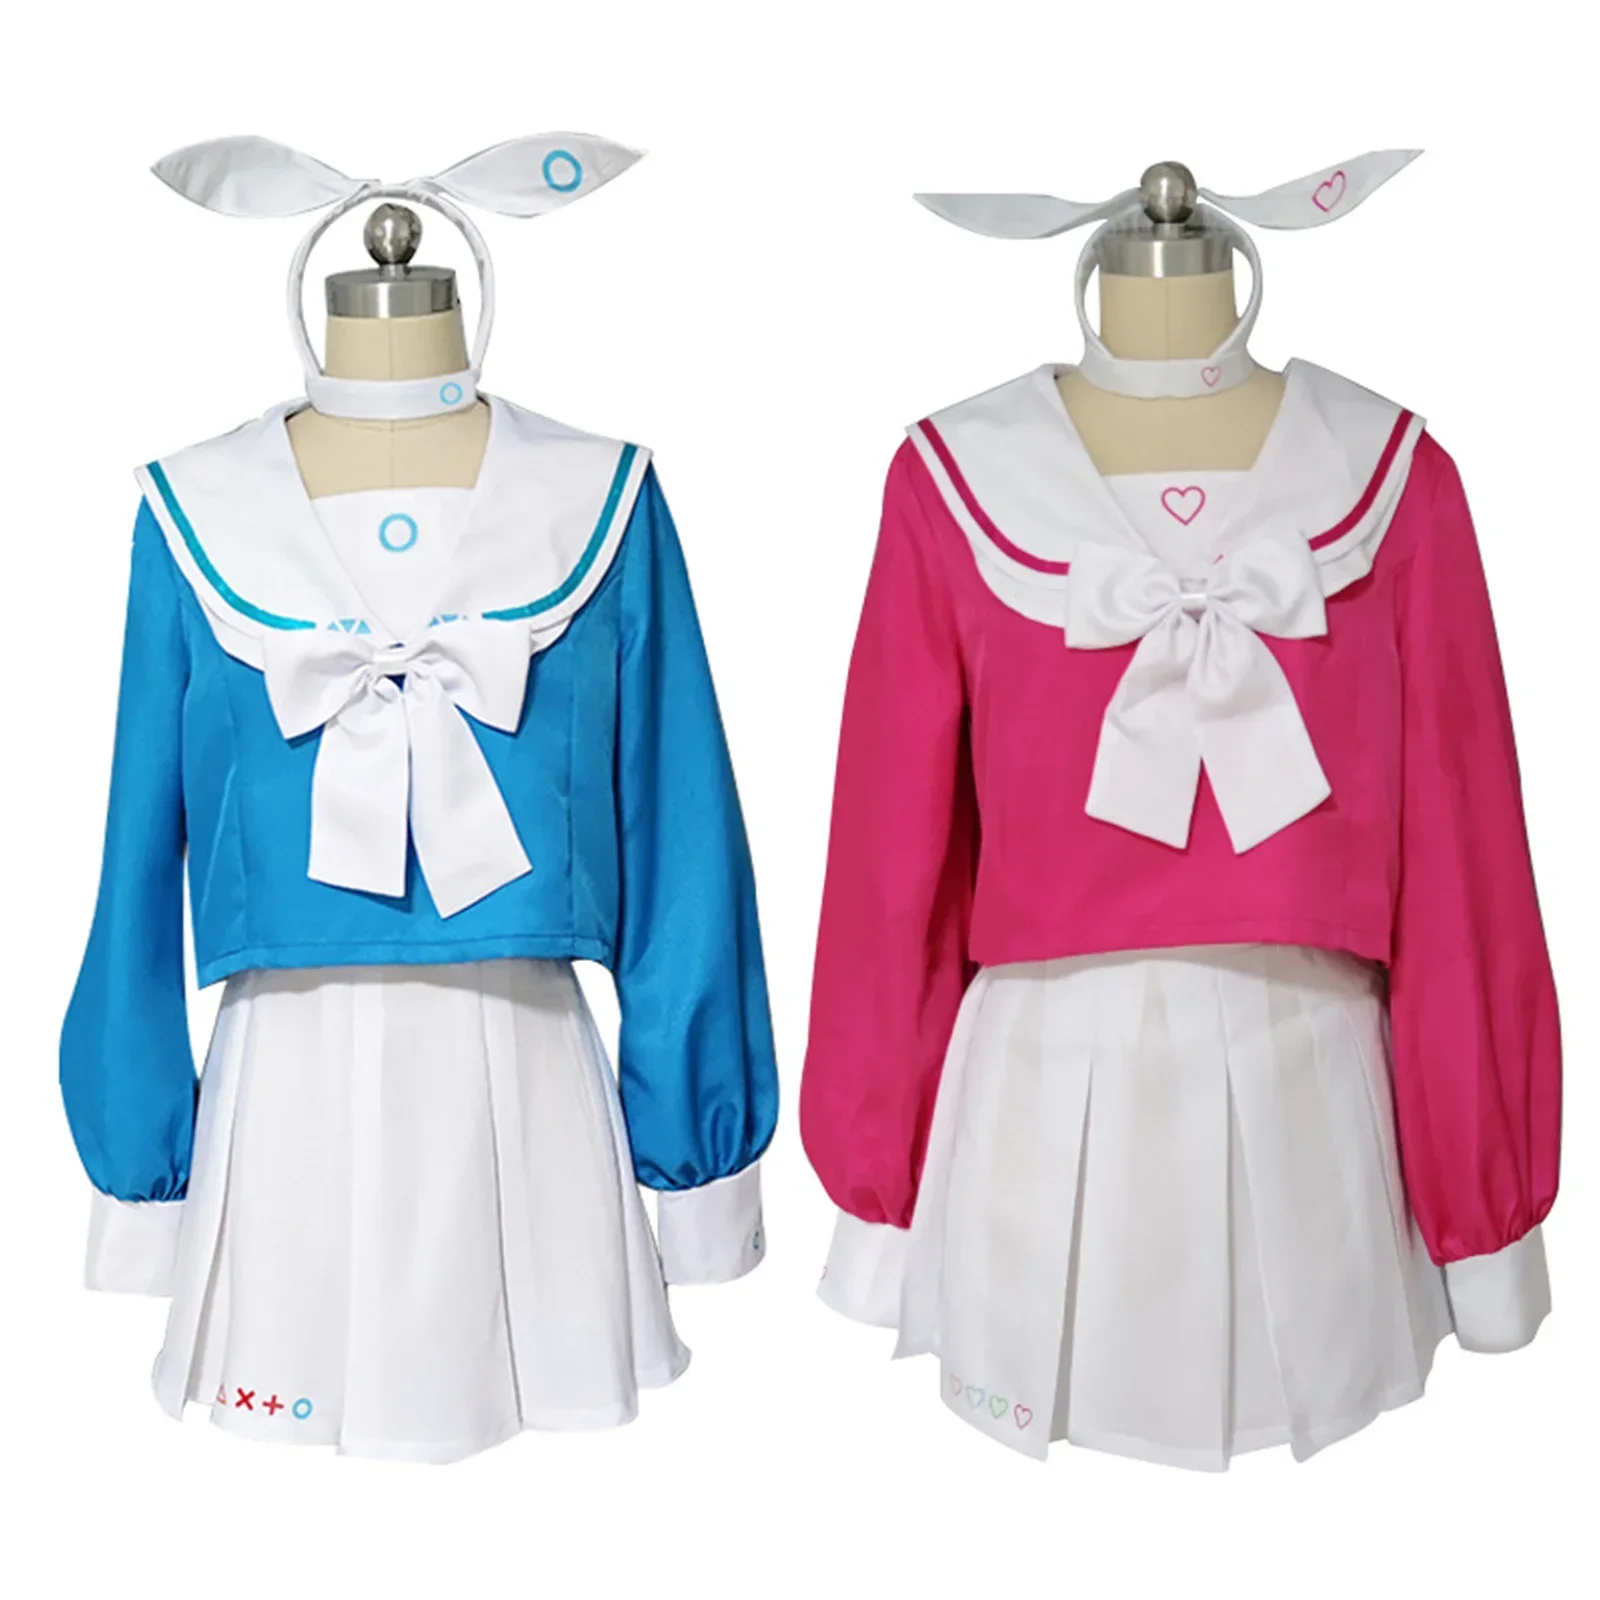 

Game Blue Archive Arona Cosplay Costume Women Cute Sailor Dress Outfit Halloween Carnival Party Uniform Suit